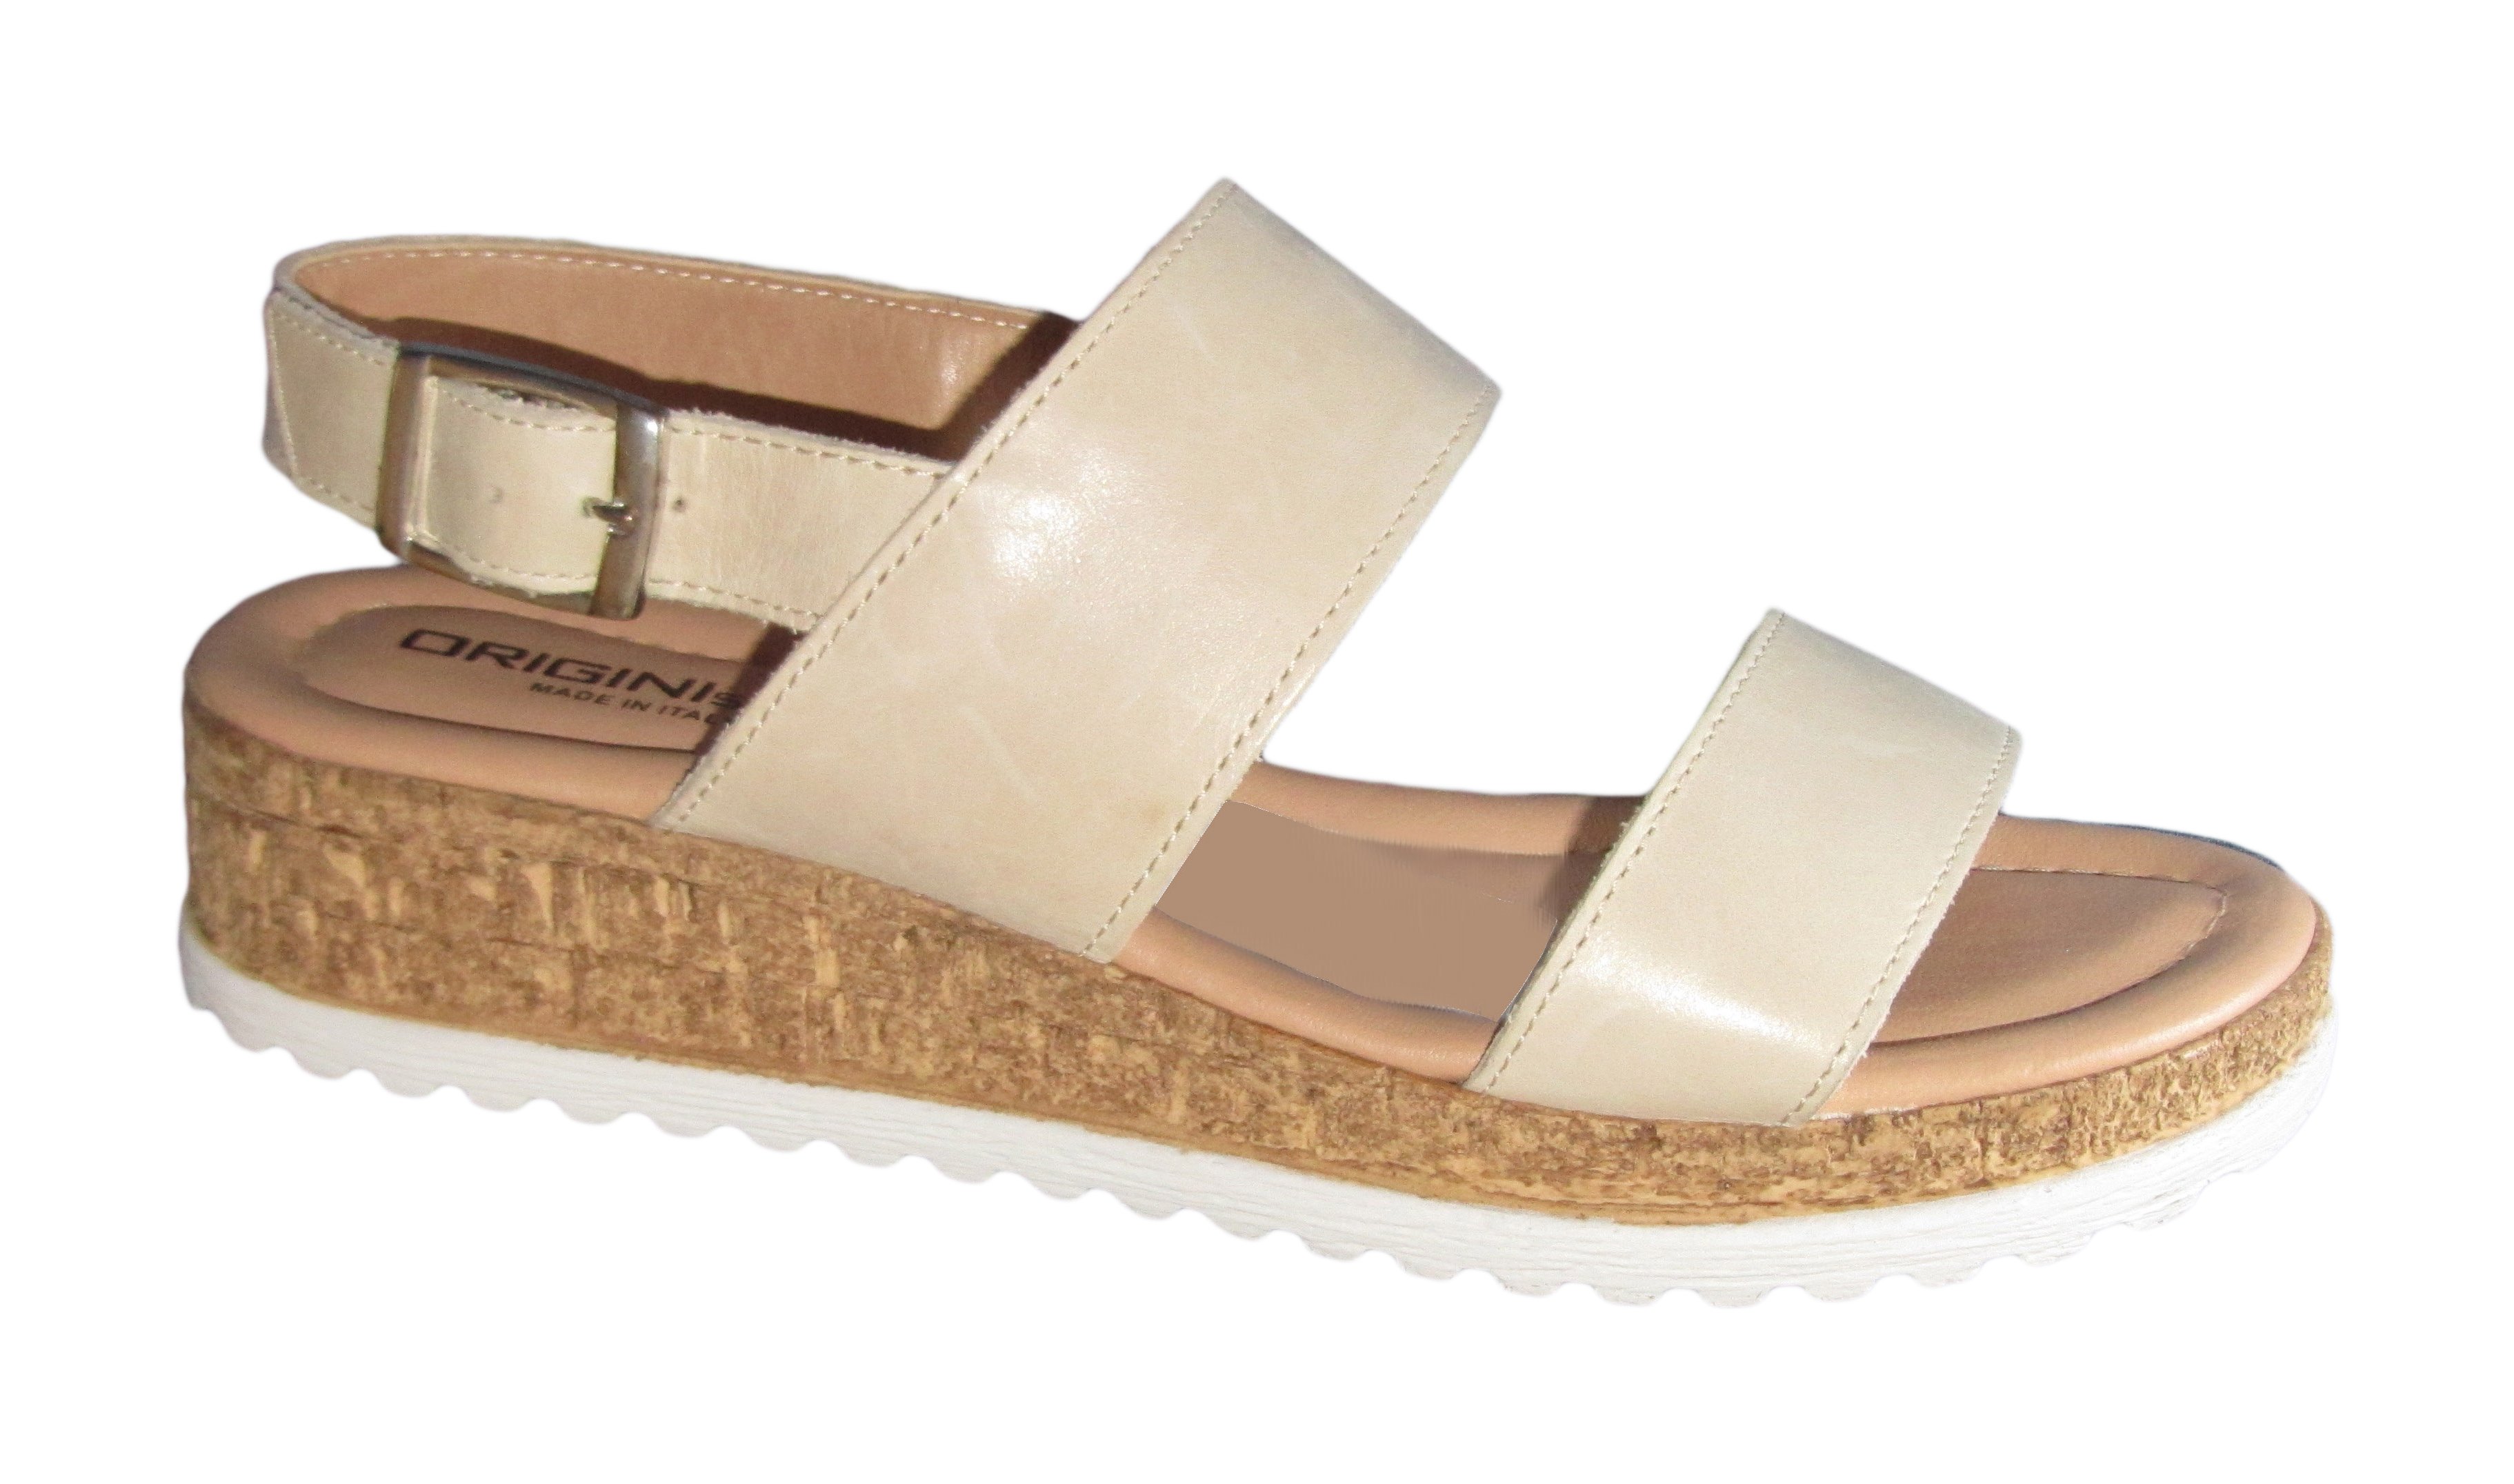 LACCA ORIGINI STUDIO - WOMENS SHOES-SANDALS - low to flat : Shirley's ...